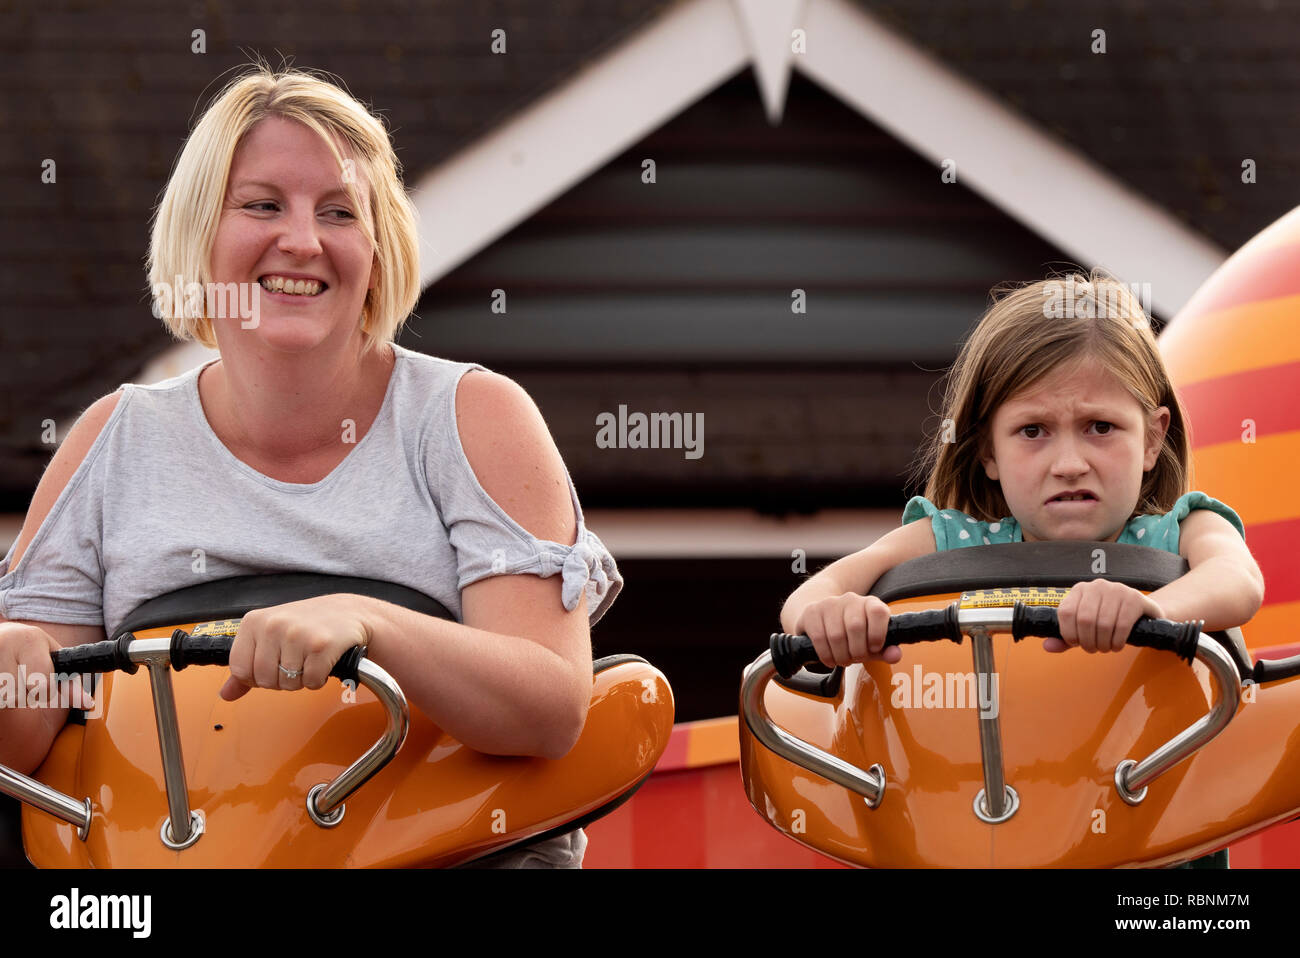 Mother and 7 year daughter having fun on pleasure park ride. Stock Photo